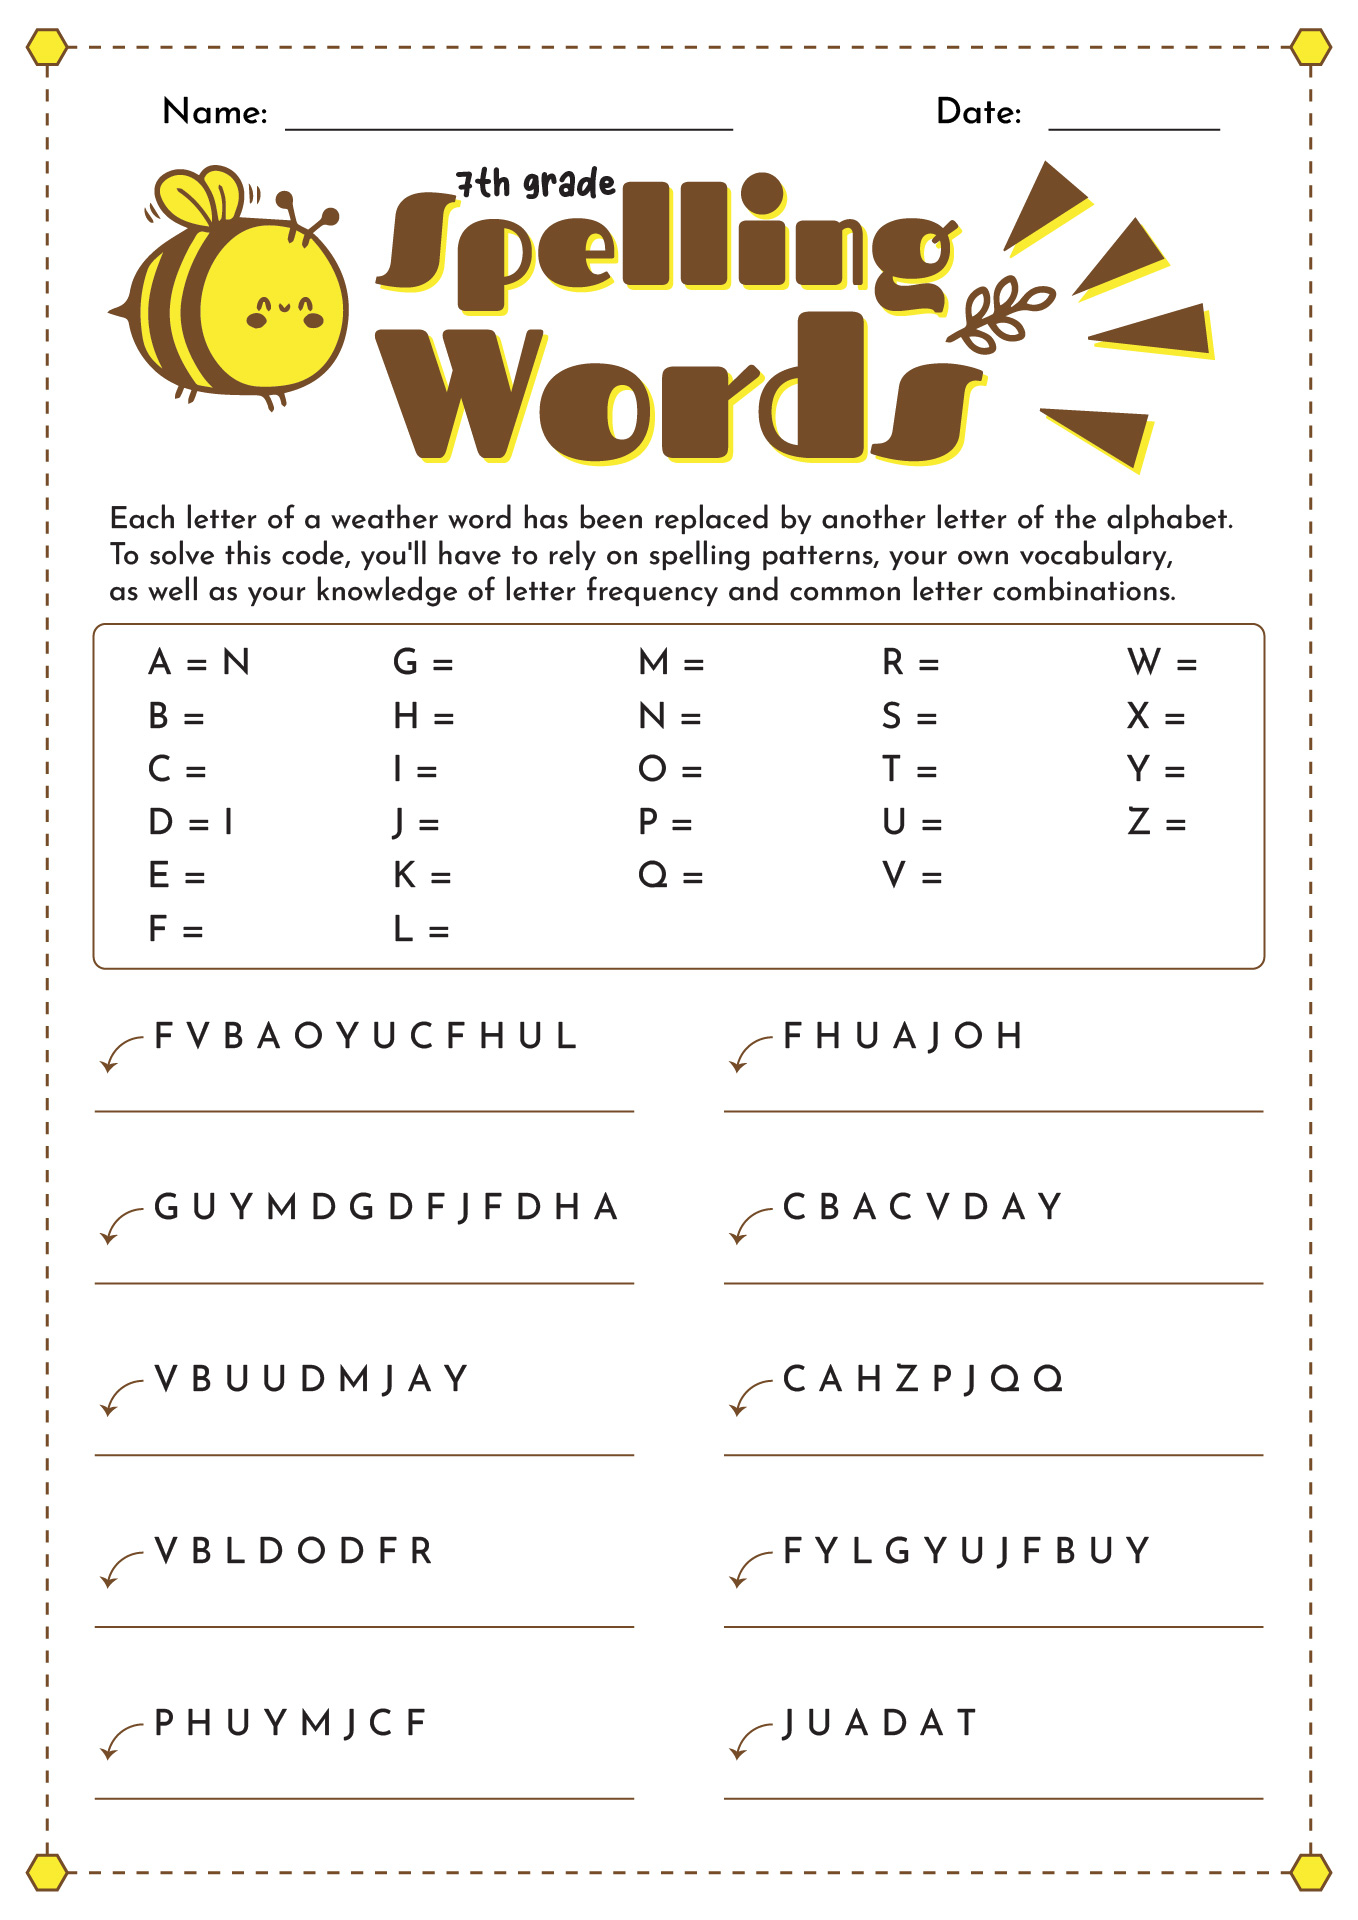 17 8Th Grade Spelling Worksheets - Free Pdf At Worksheeto in 7Th Grade Spelling Worksheets Free Printable